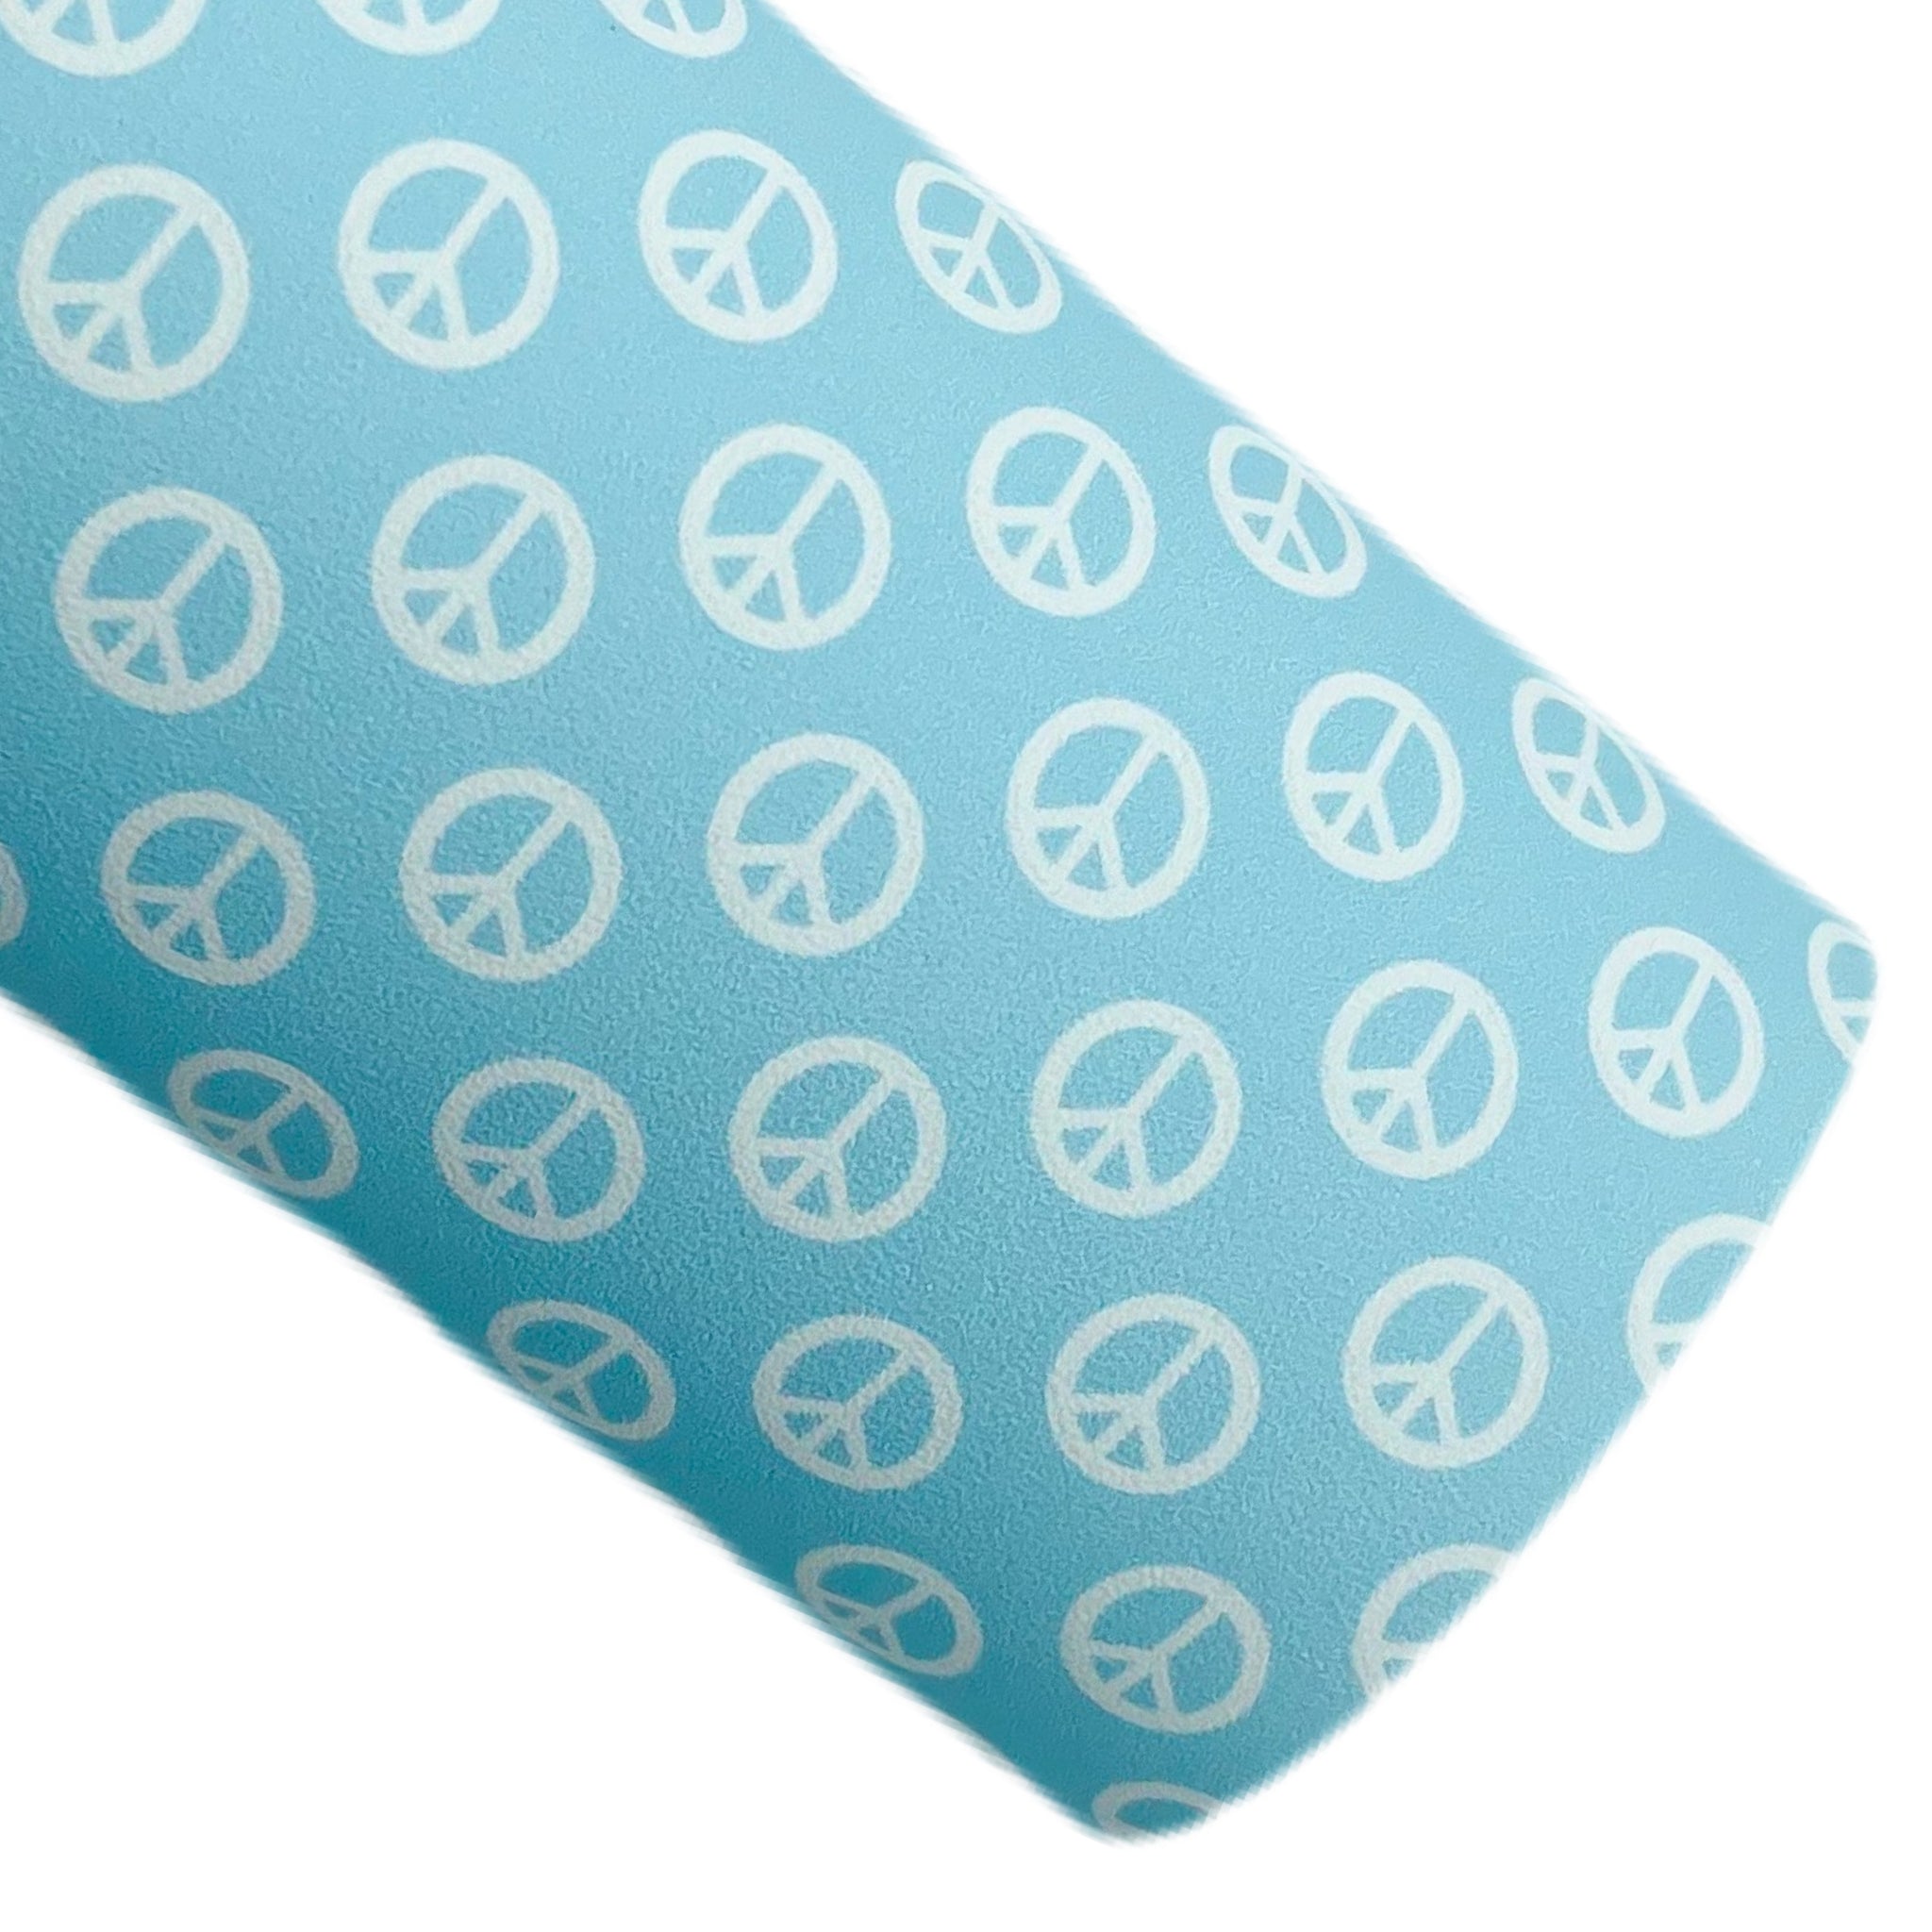 Blue Peace Signs Custom Print on Smooth Faux Leather